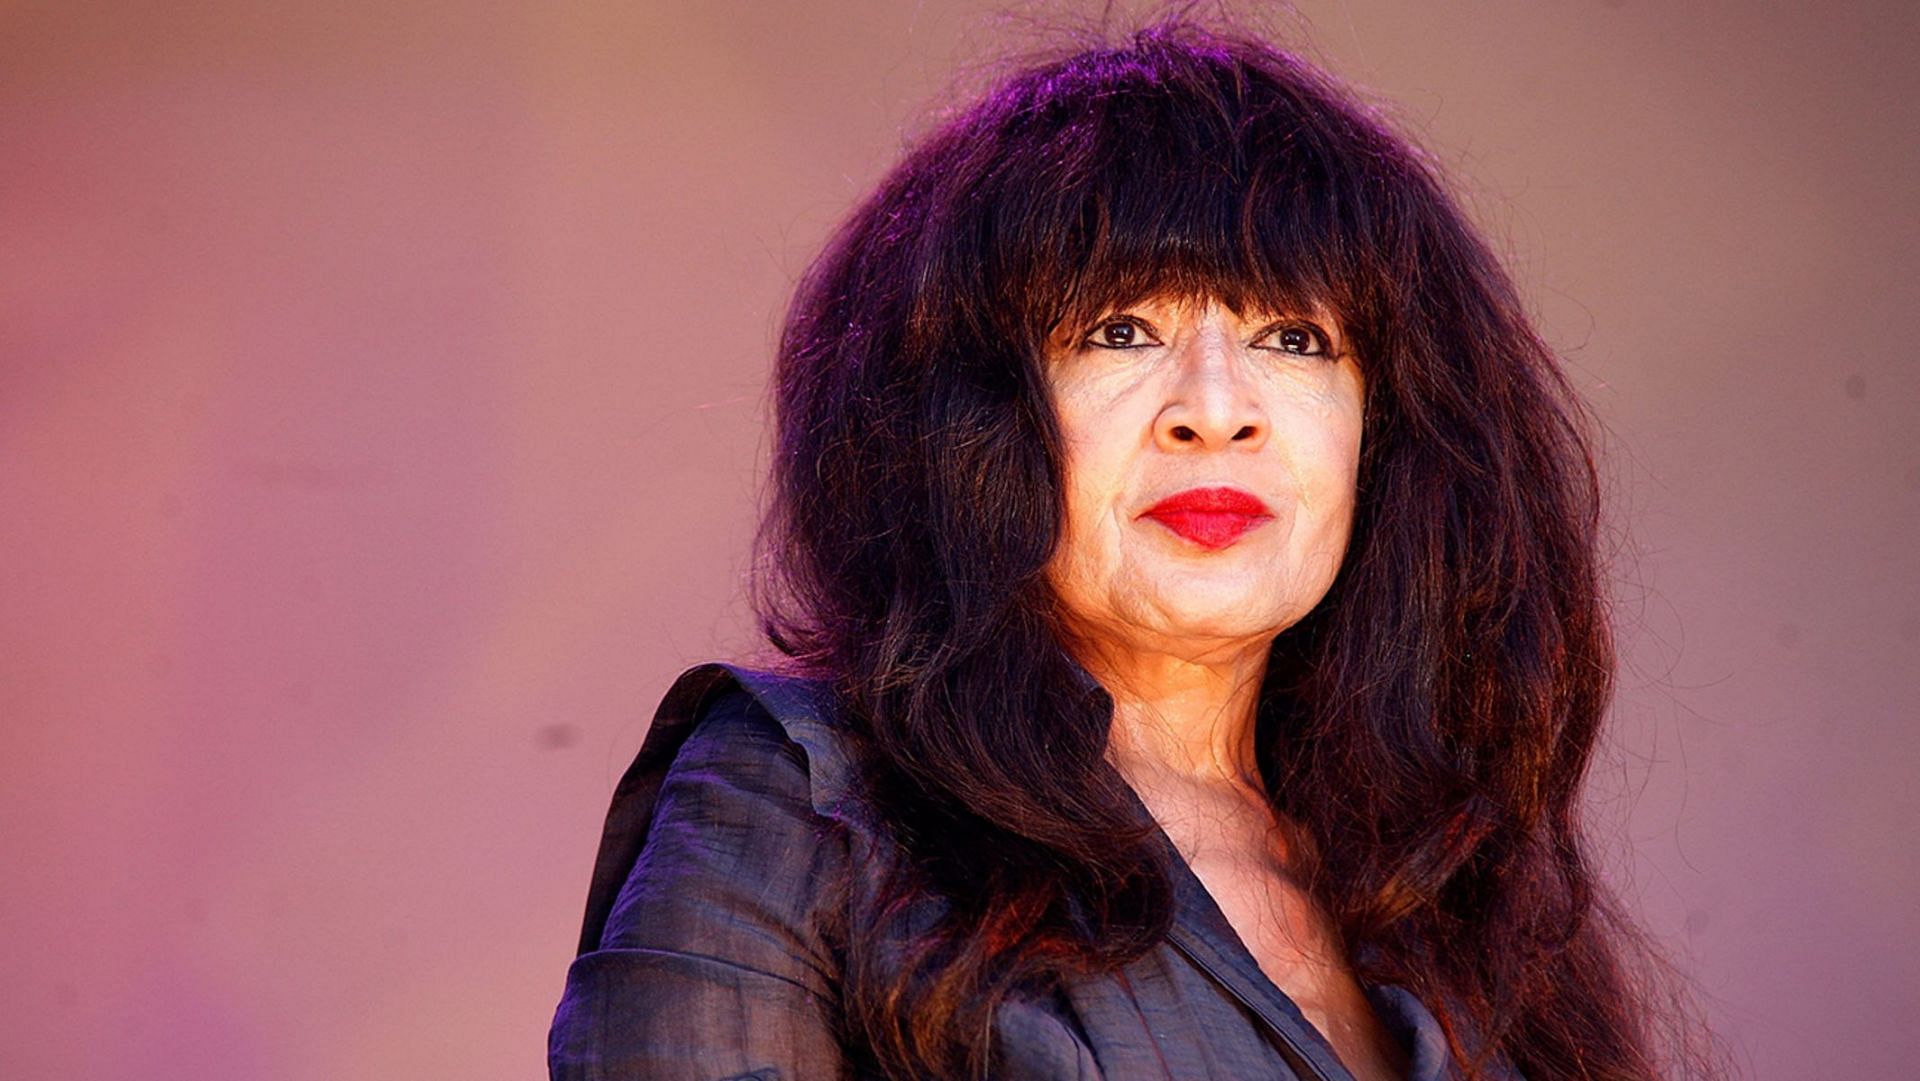 Ronnie Spector of The Ronettes (Image via Getty Images/Andy Kropa)